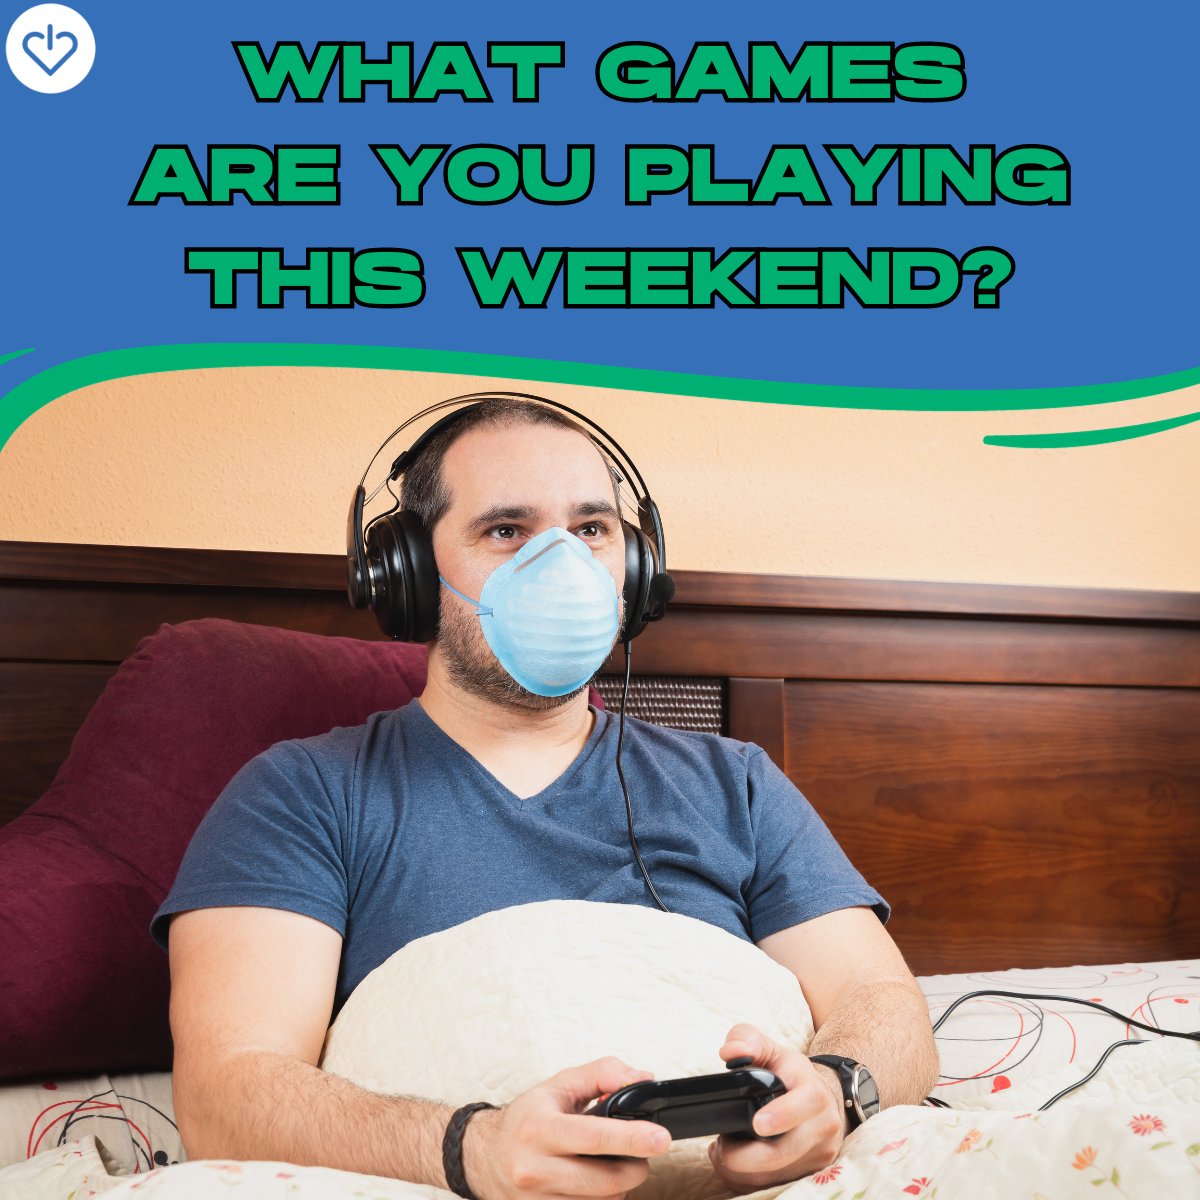 What are you playing this weekend?